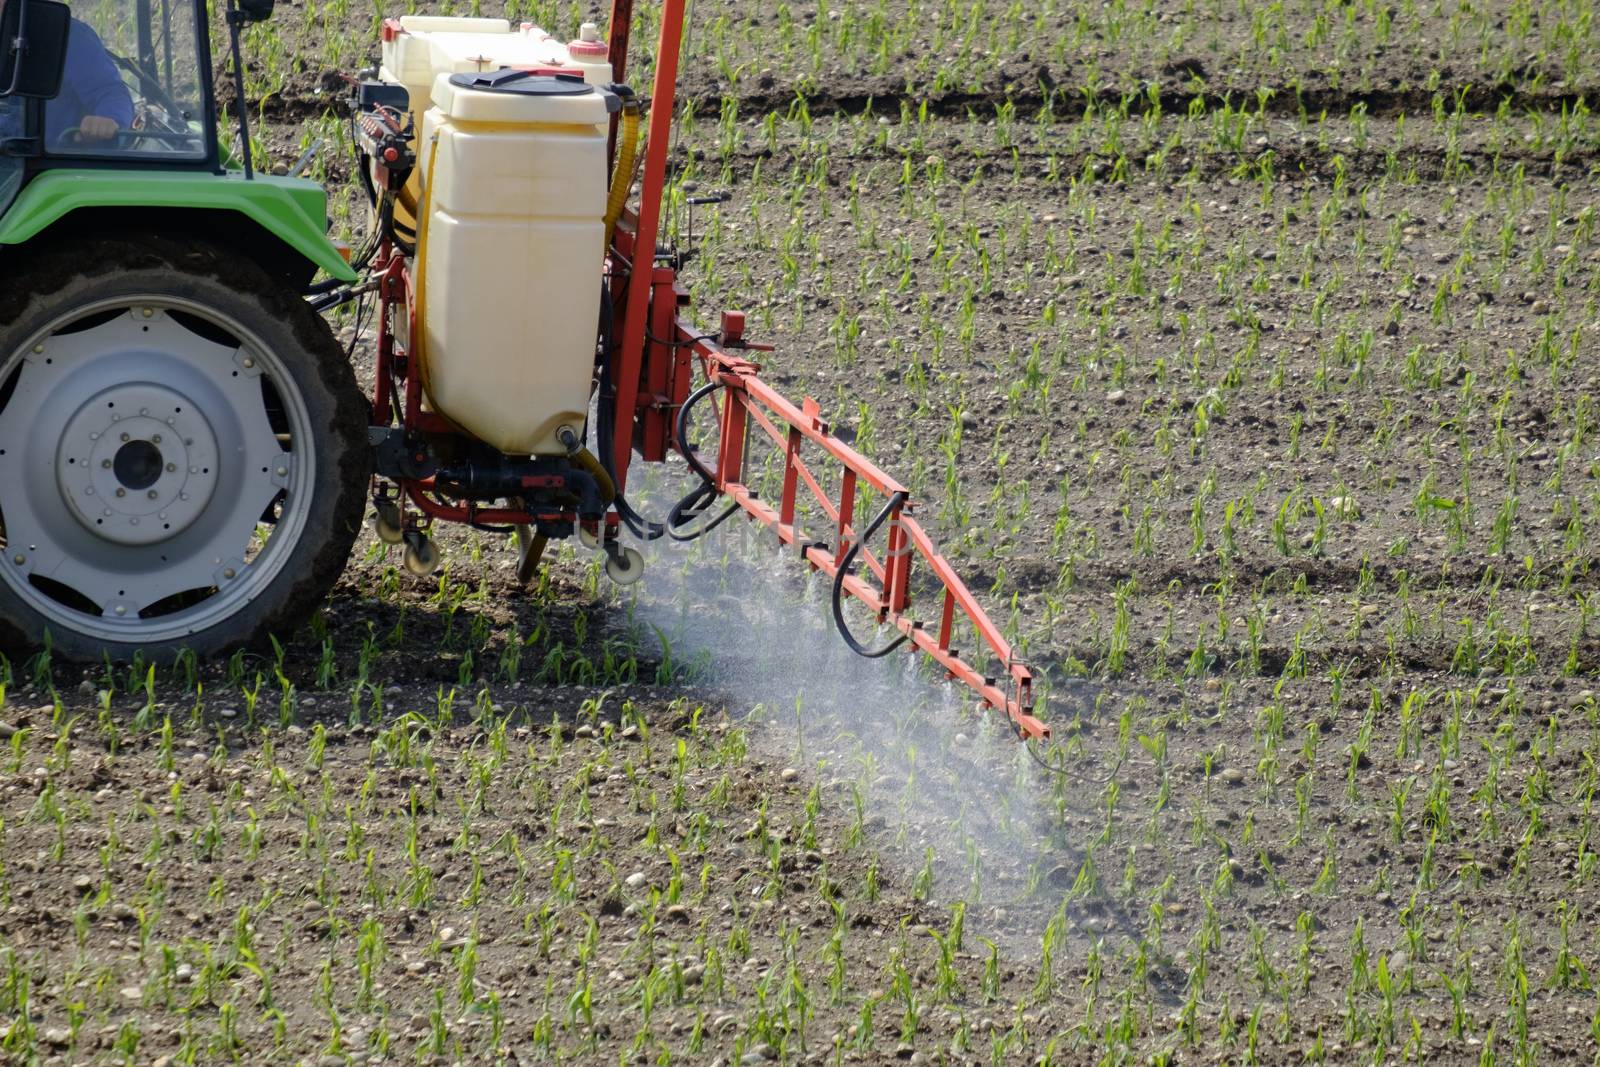 Tractor spraying pesticide on a field with young plants